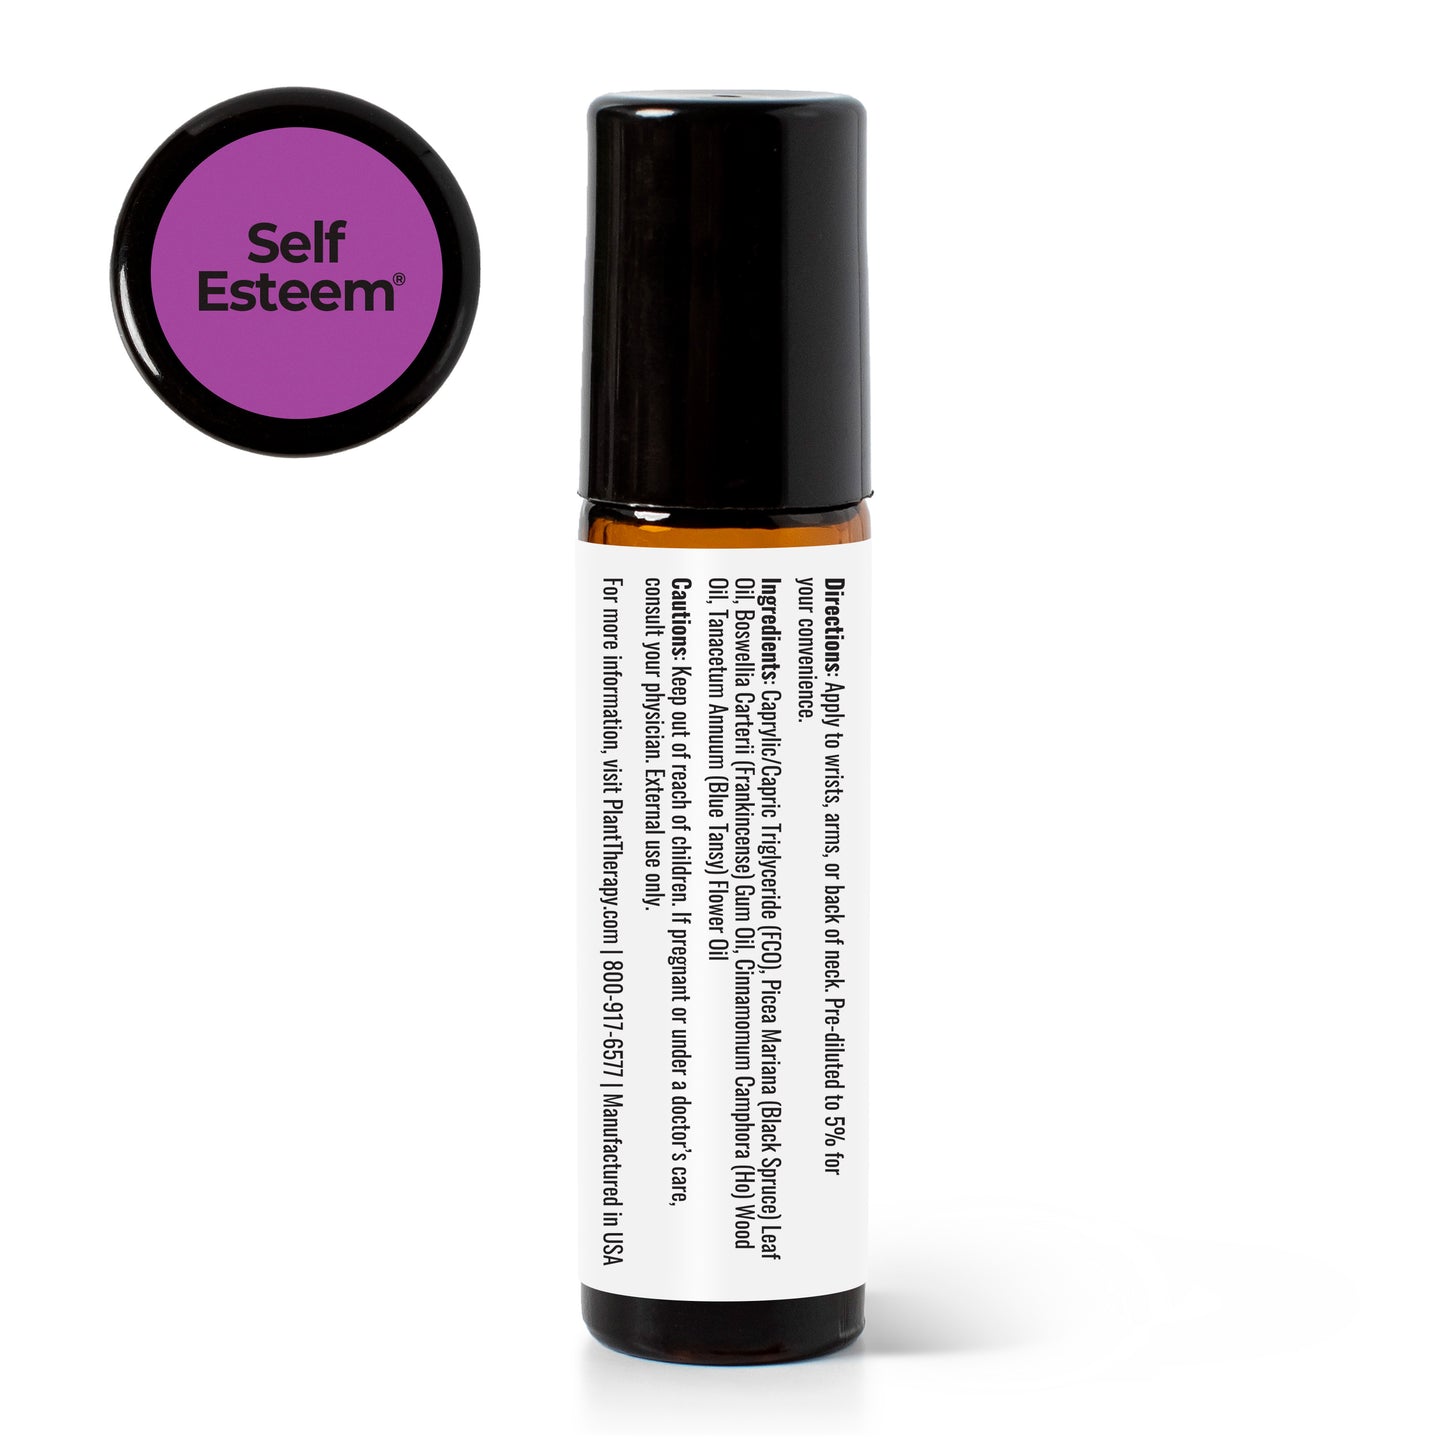 Self Esteem Essential Oil Pre-Diluted Roll-On